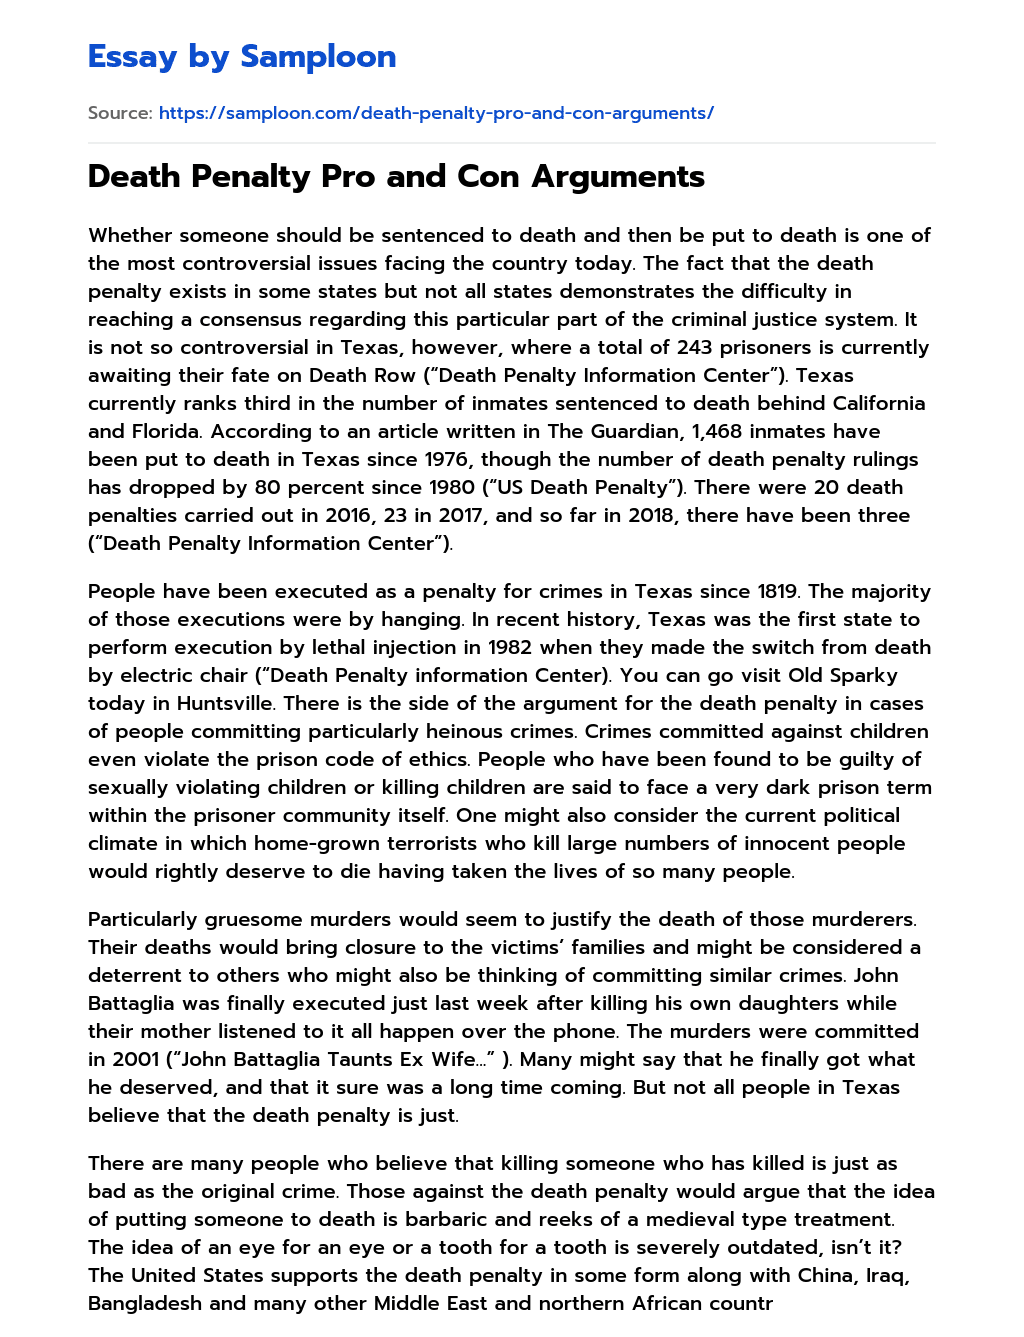 conclusion of death penalty essay